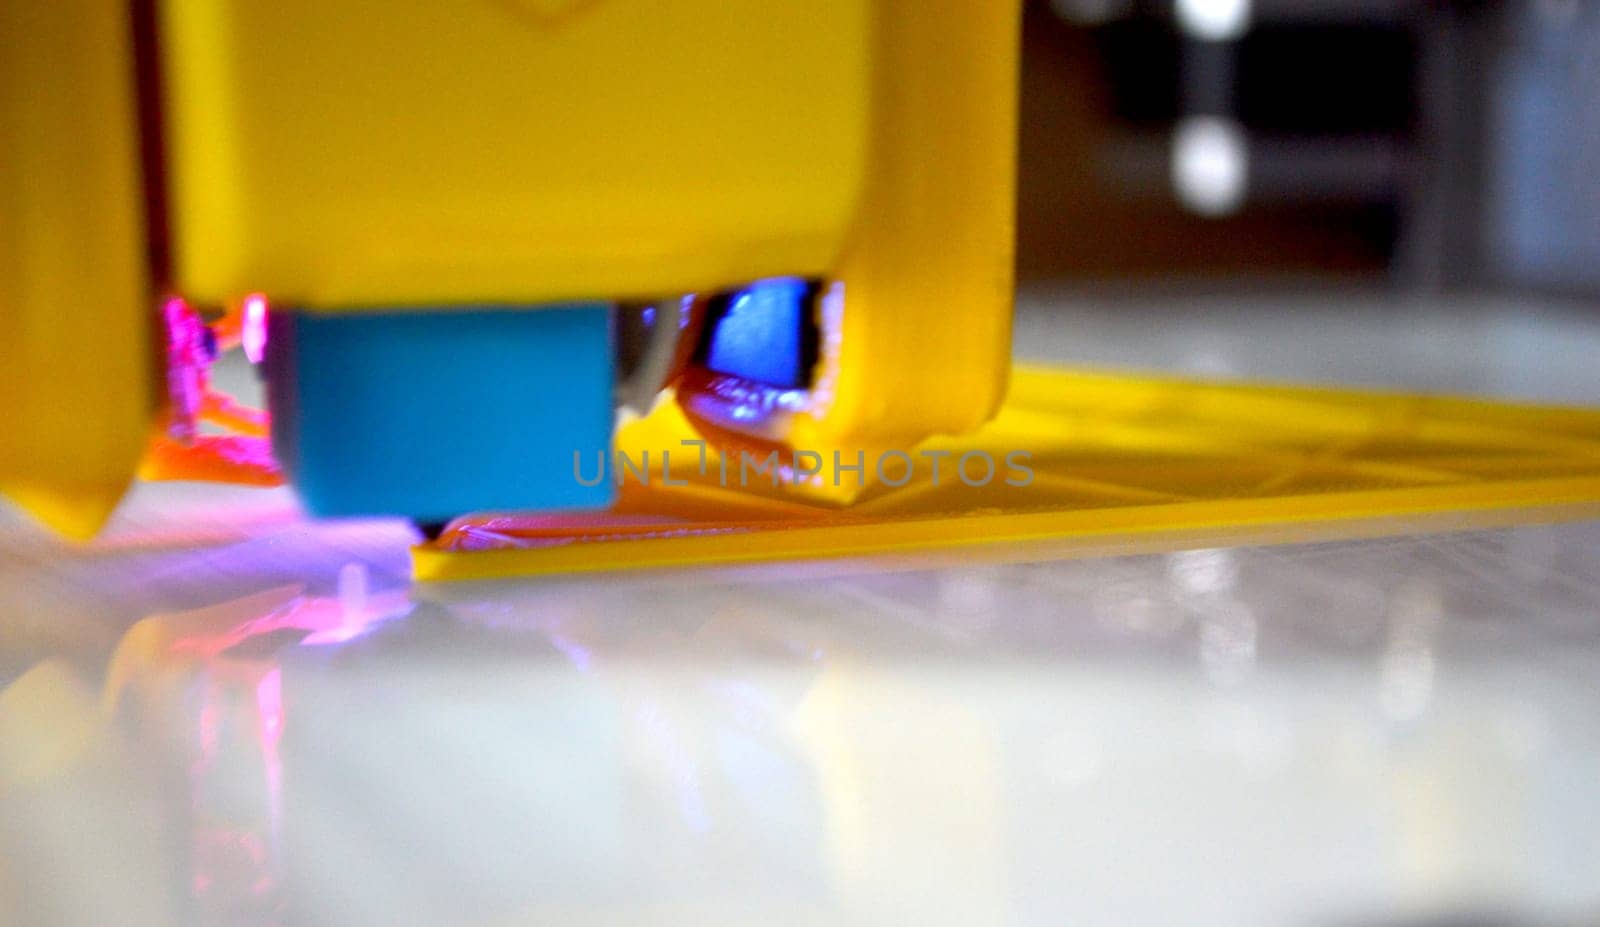 3D printer close up. A working 3D printer in process of printing object from molten plastic. 3D printer creating model by flowing liquid plastic from an extruder of printer. 3D printing technology